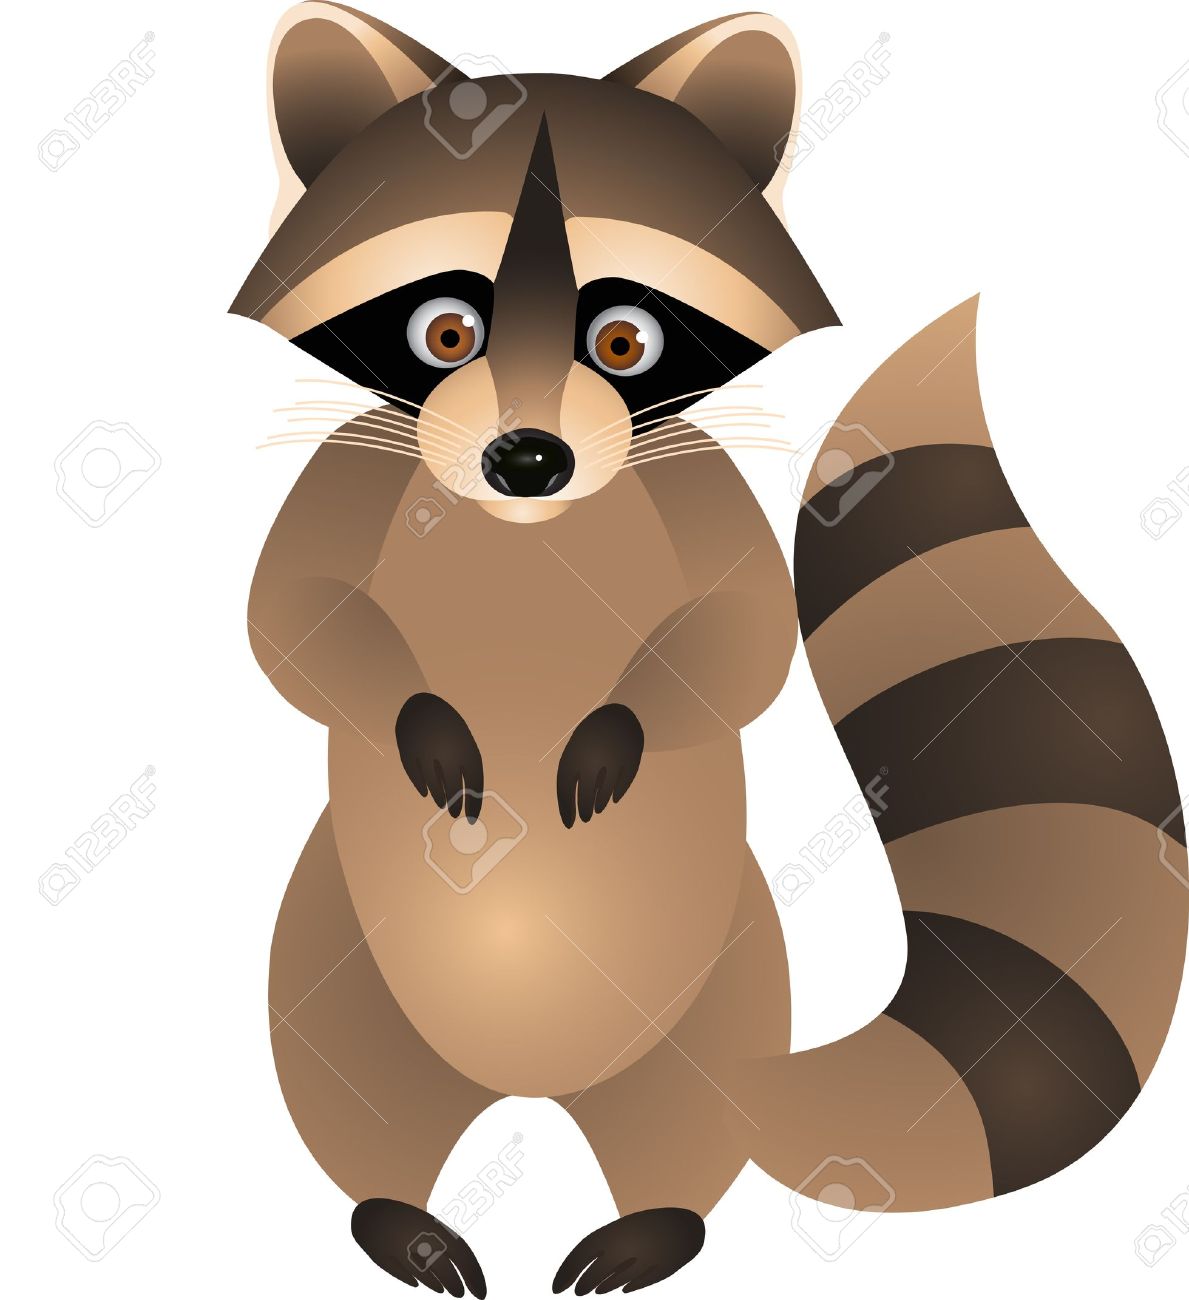 Raccoon clipart #13, Download drawings